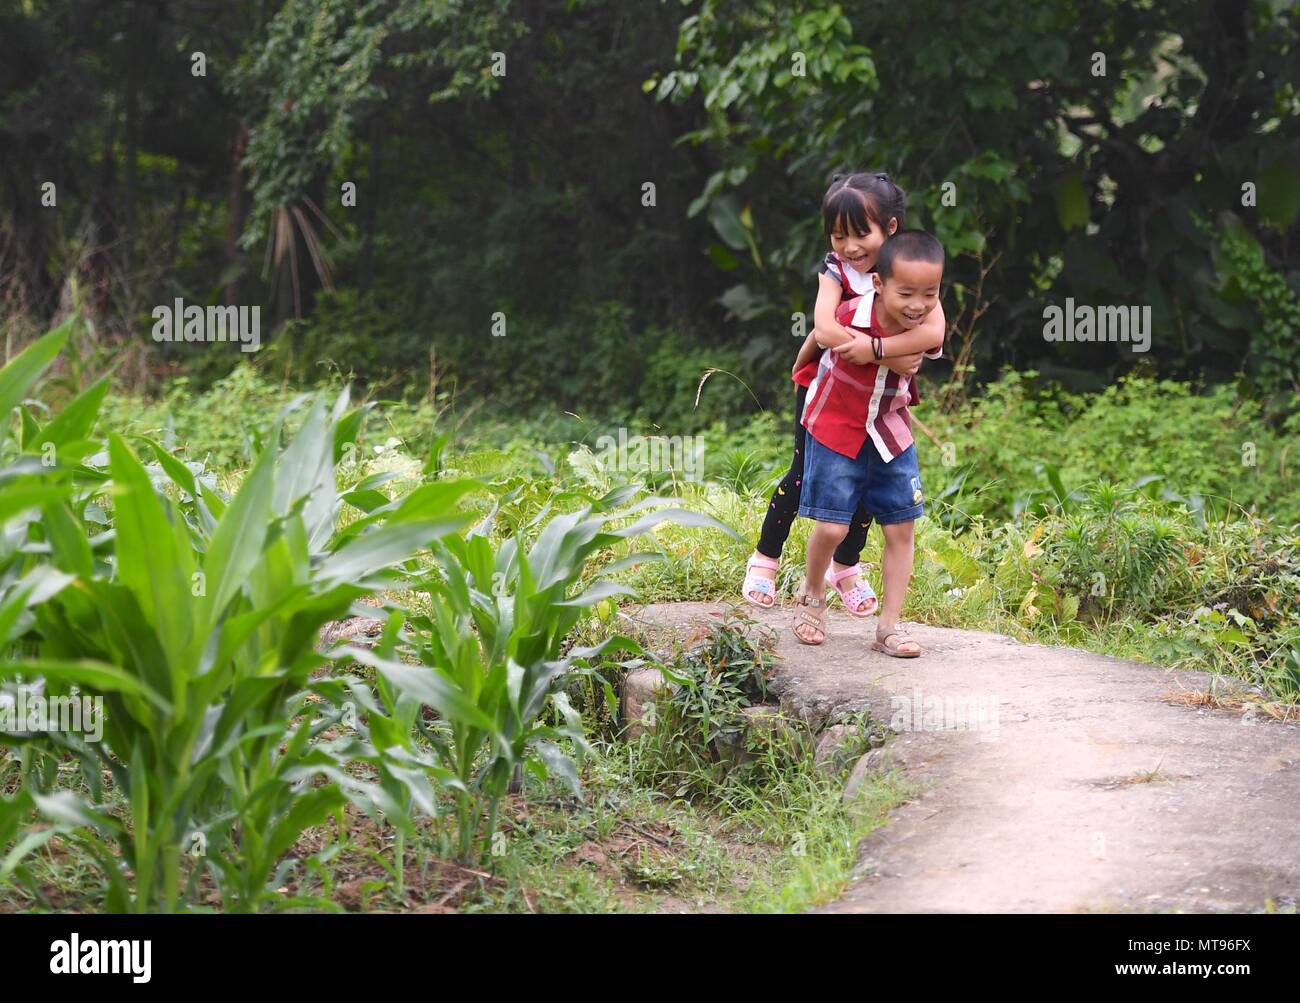 Nanchang, China's Jiangxi Province. 23rd May, 2018. Six-year-old Xu Yunlong carries his twin sister Xu Yunfeng on his back in Suolong Village of Yudu County, east China's Jiangxi Province, May 23, 2018. With about 1,000 residents, Suolong Village has 29 cases of multiple births, a high rate considering the modest population size. Credit: Hu Chenhuan/Xinhua/Alamy Live News Stock Photo